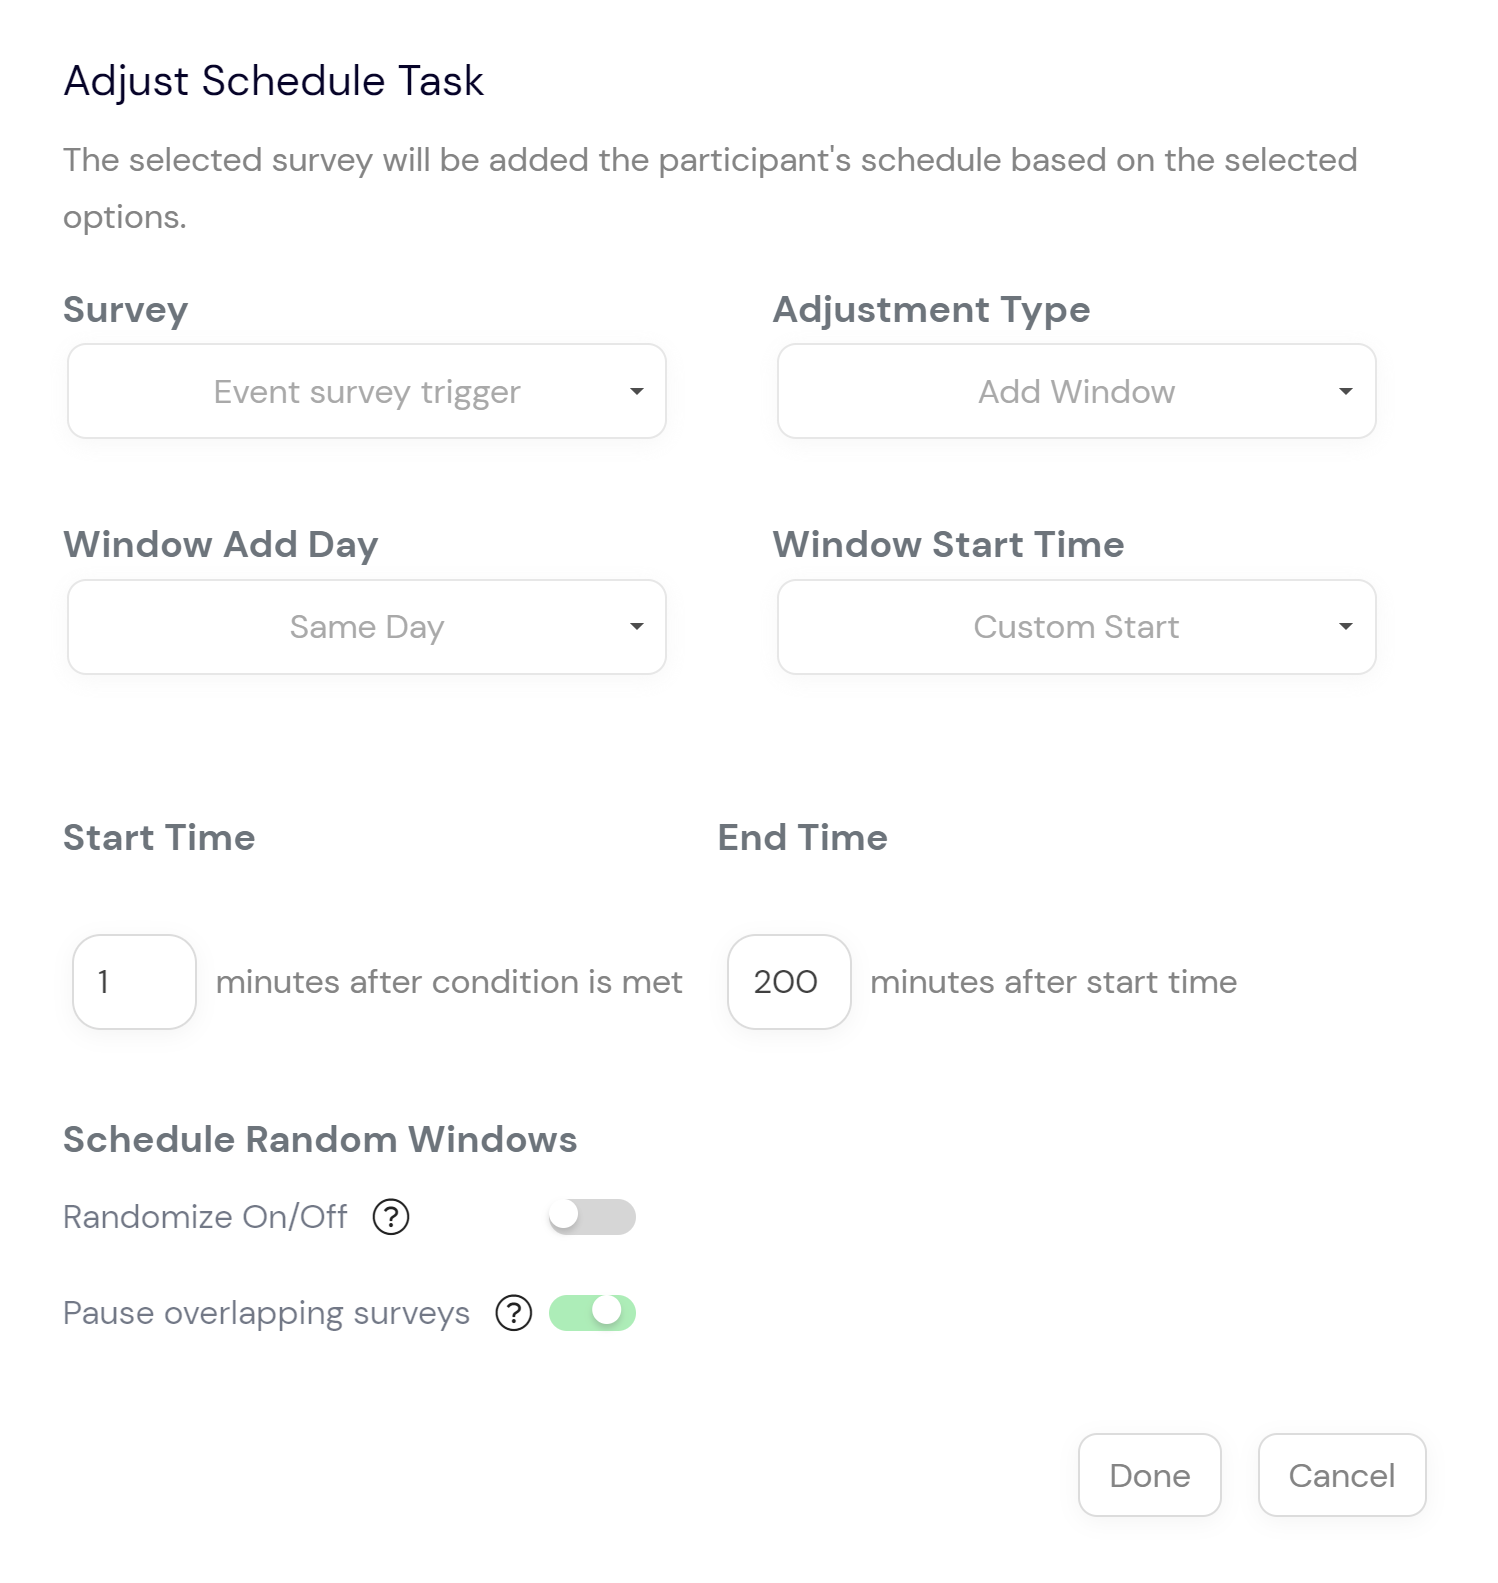 adjust schedule task showing the minutes